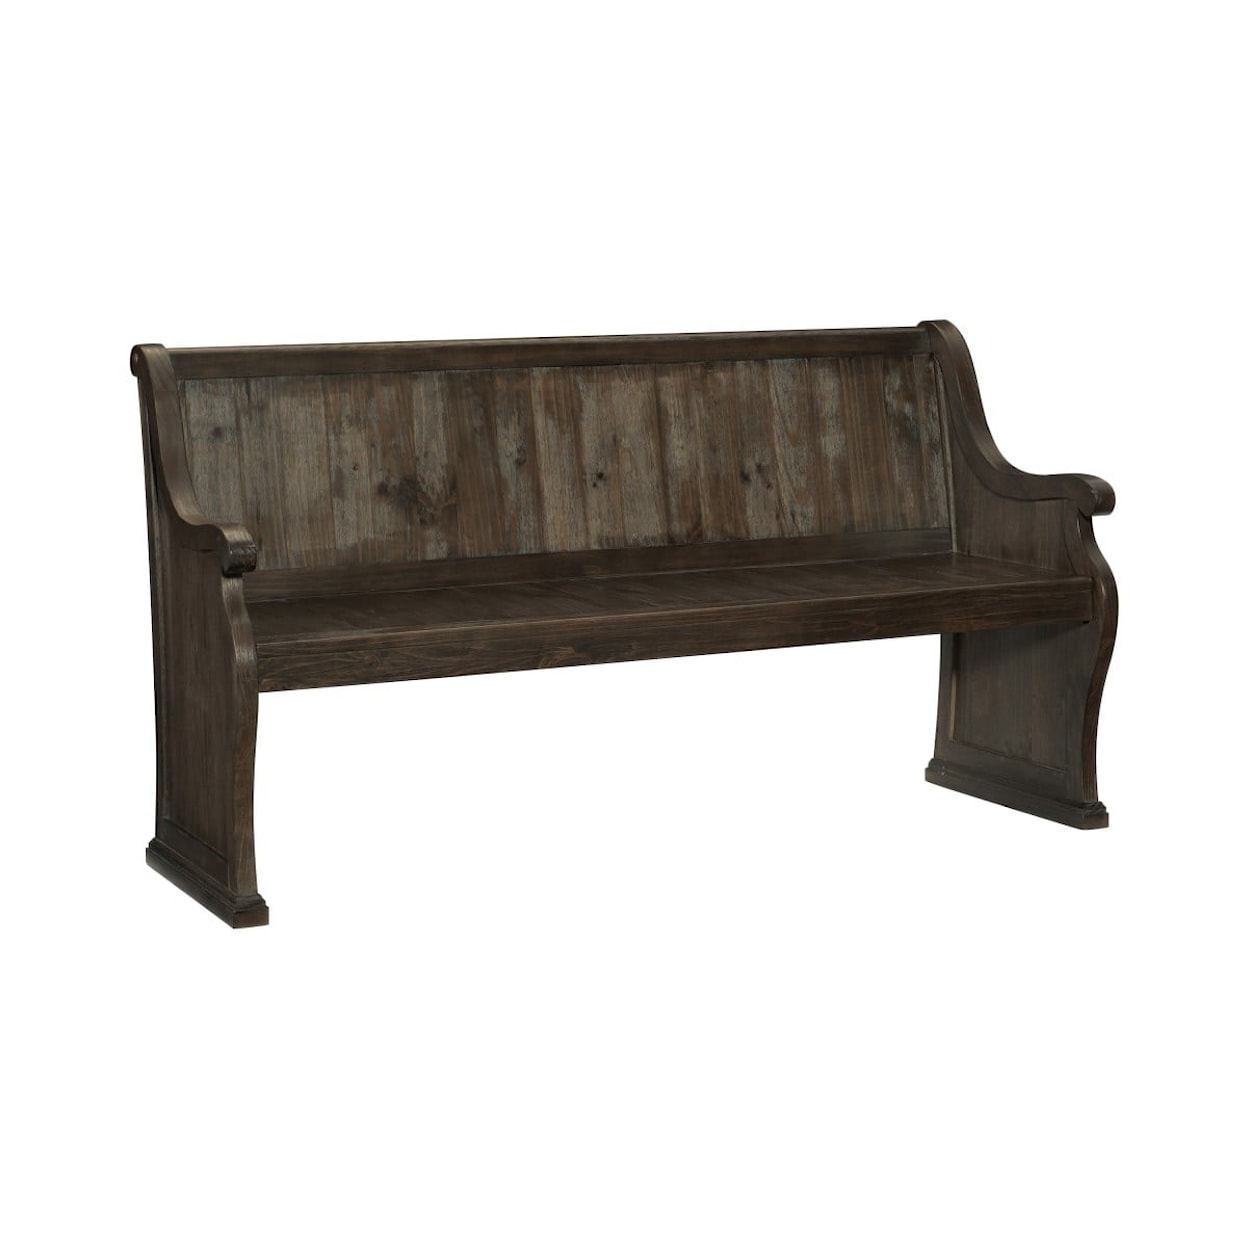 Homelegance Gloversville Dining Bench with Arms